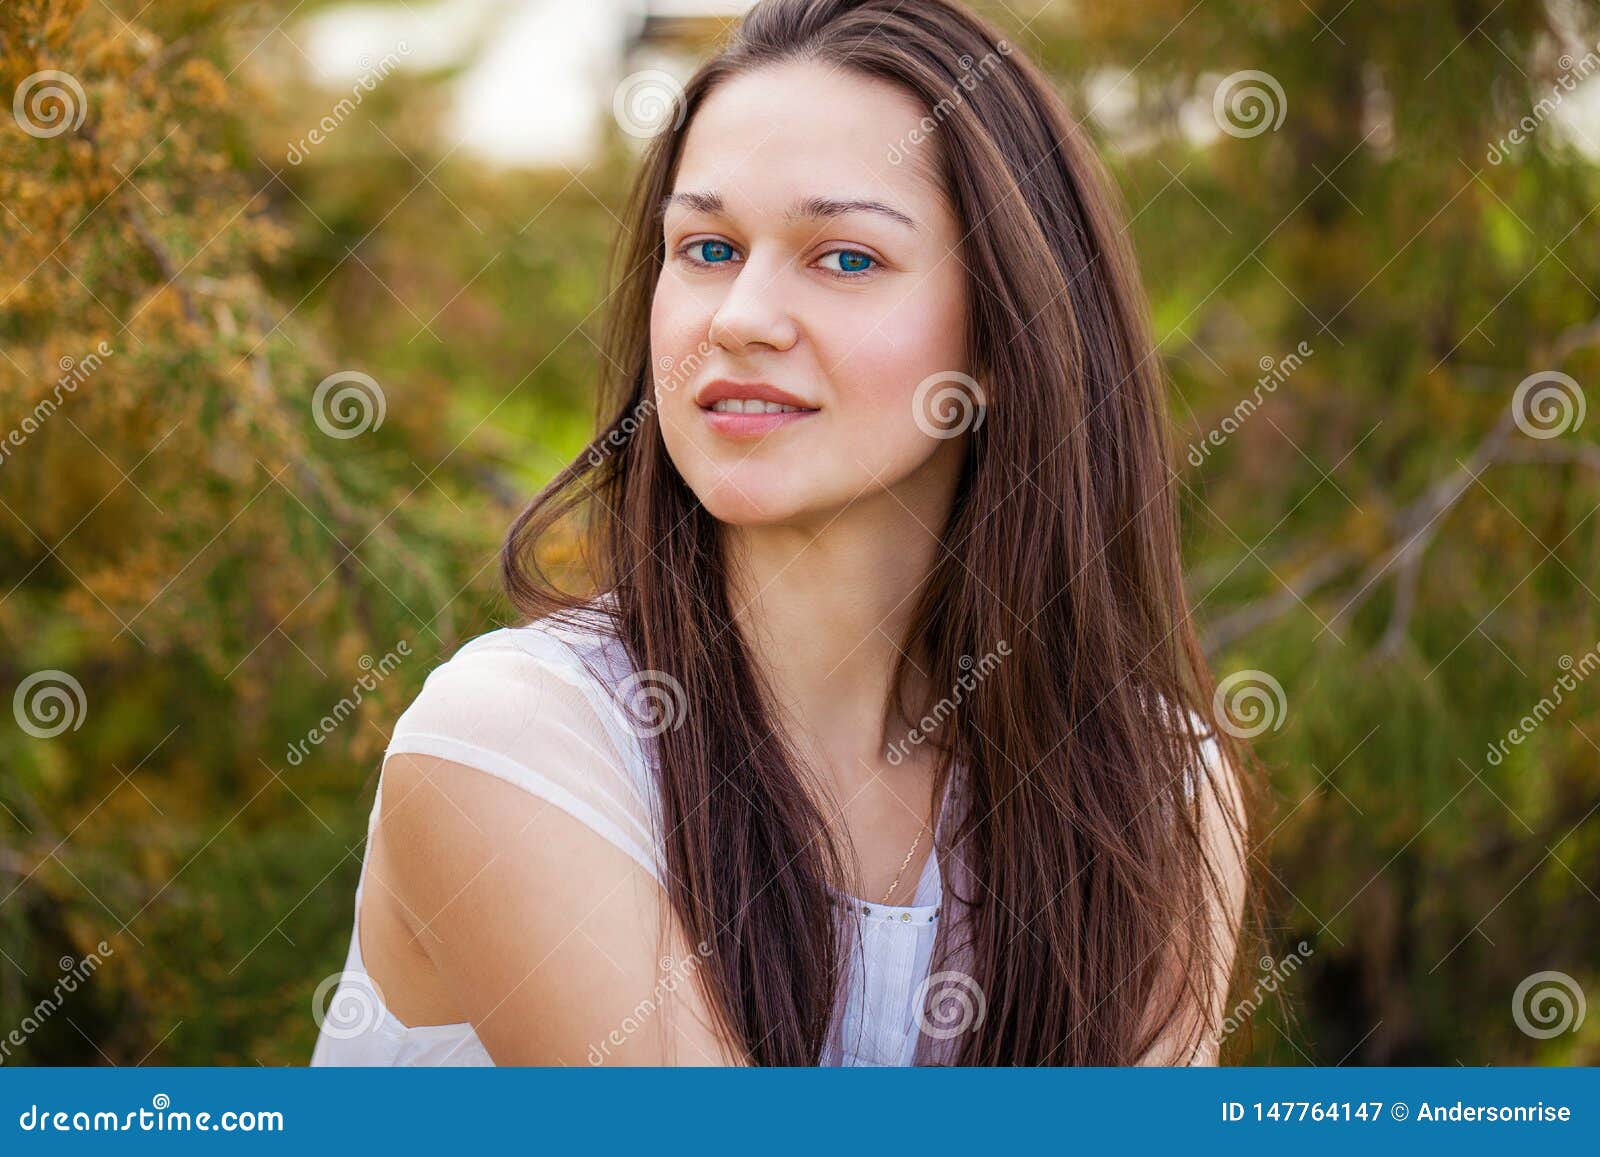 Portrait of Beautiful Young Happy Woman Stock Image - Image of fresh ...